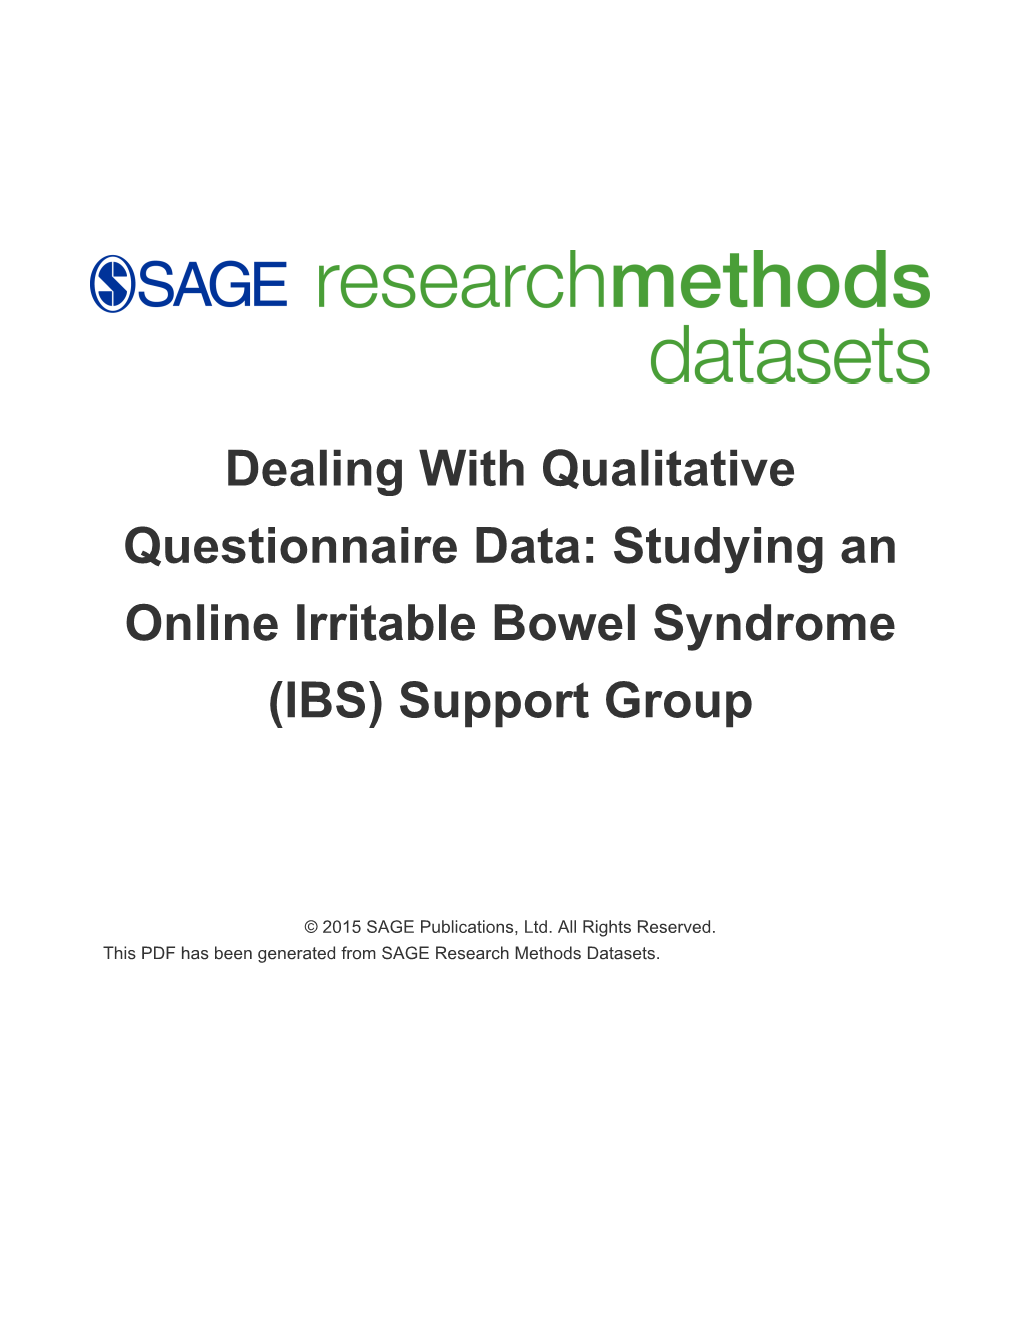 Studying an Online Irritable Bowel Syndrome (IBS) Support Group